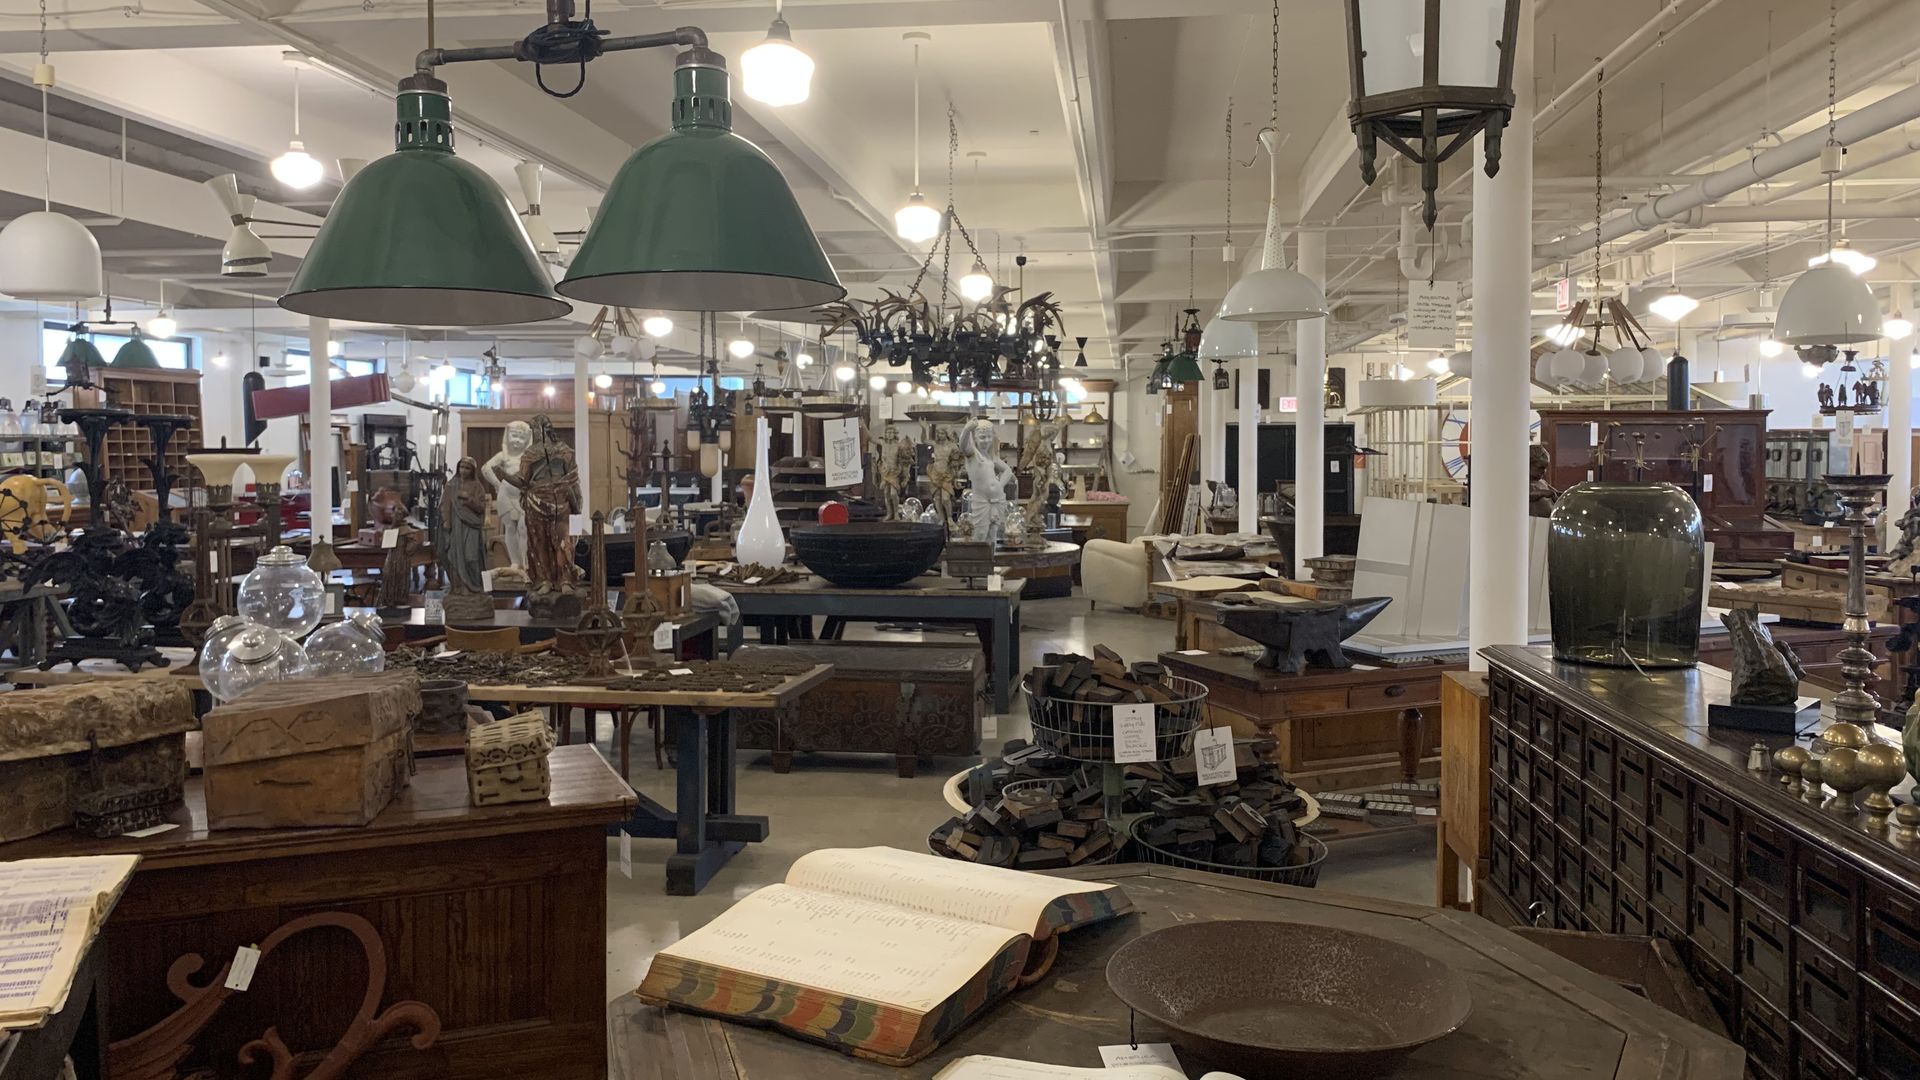 Photo of a room of antiques. 